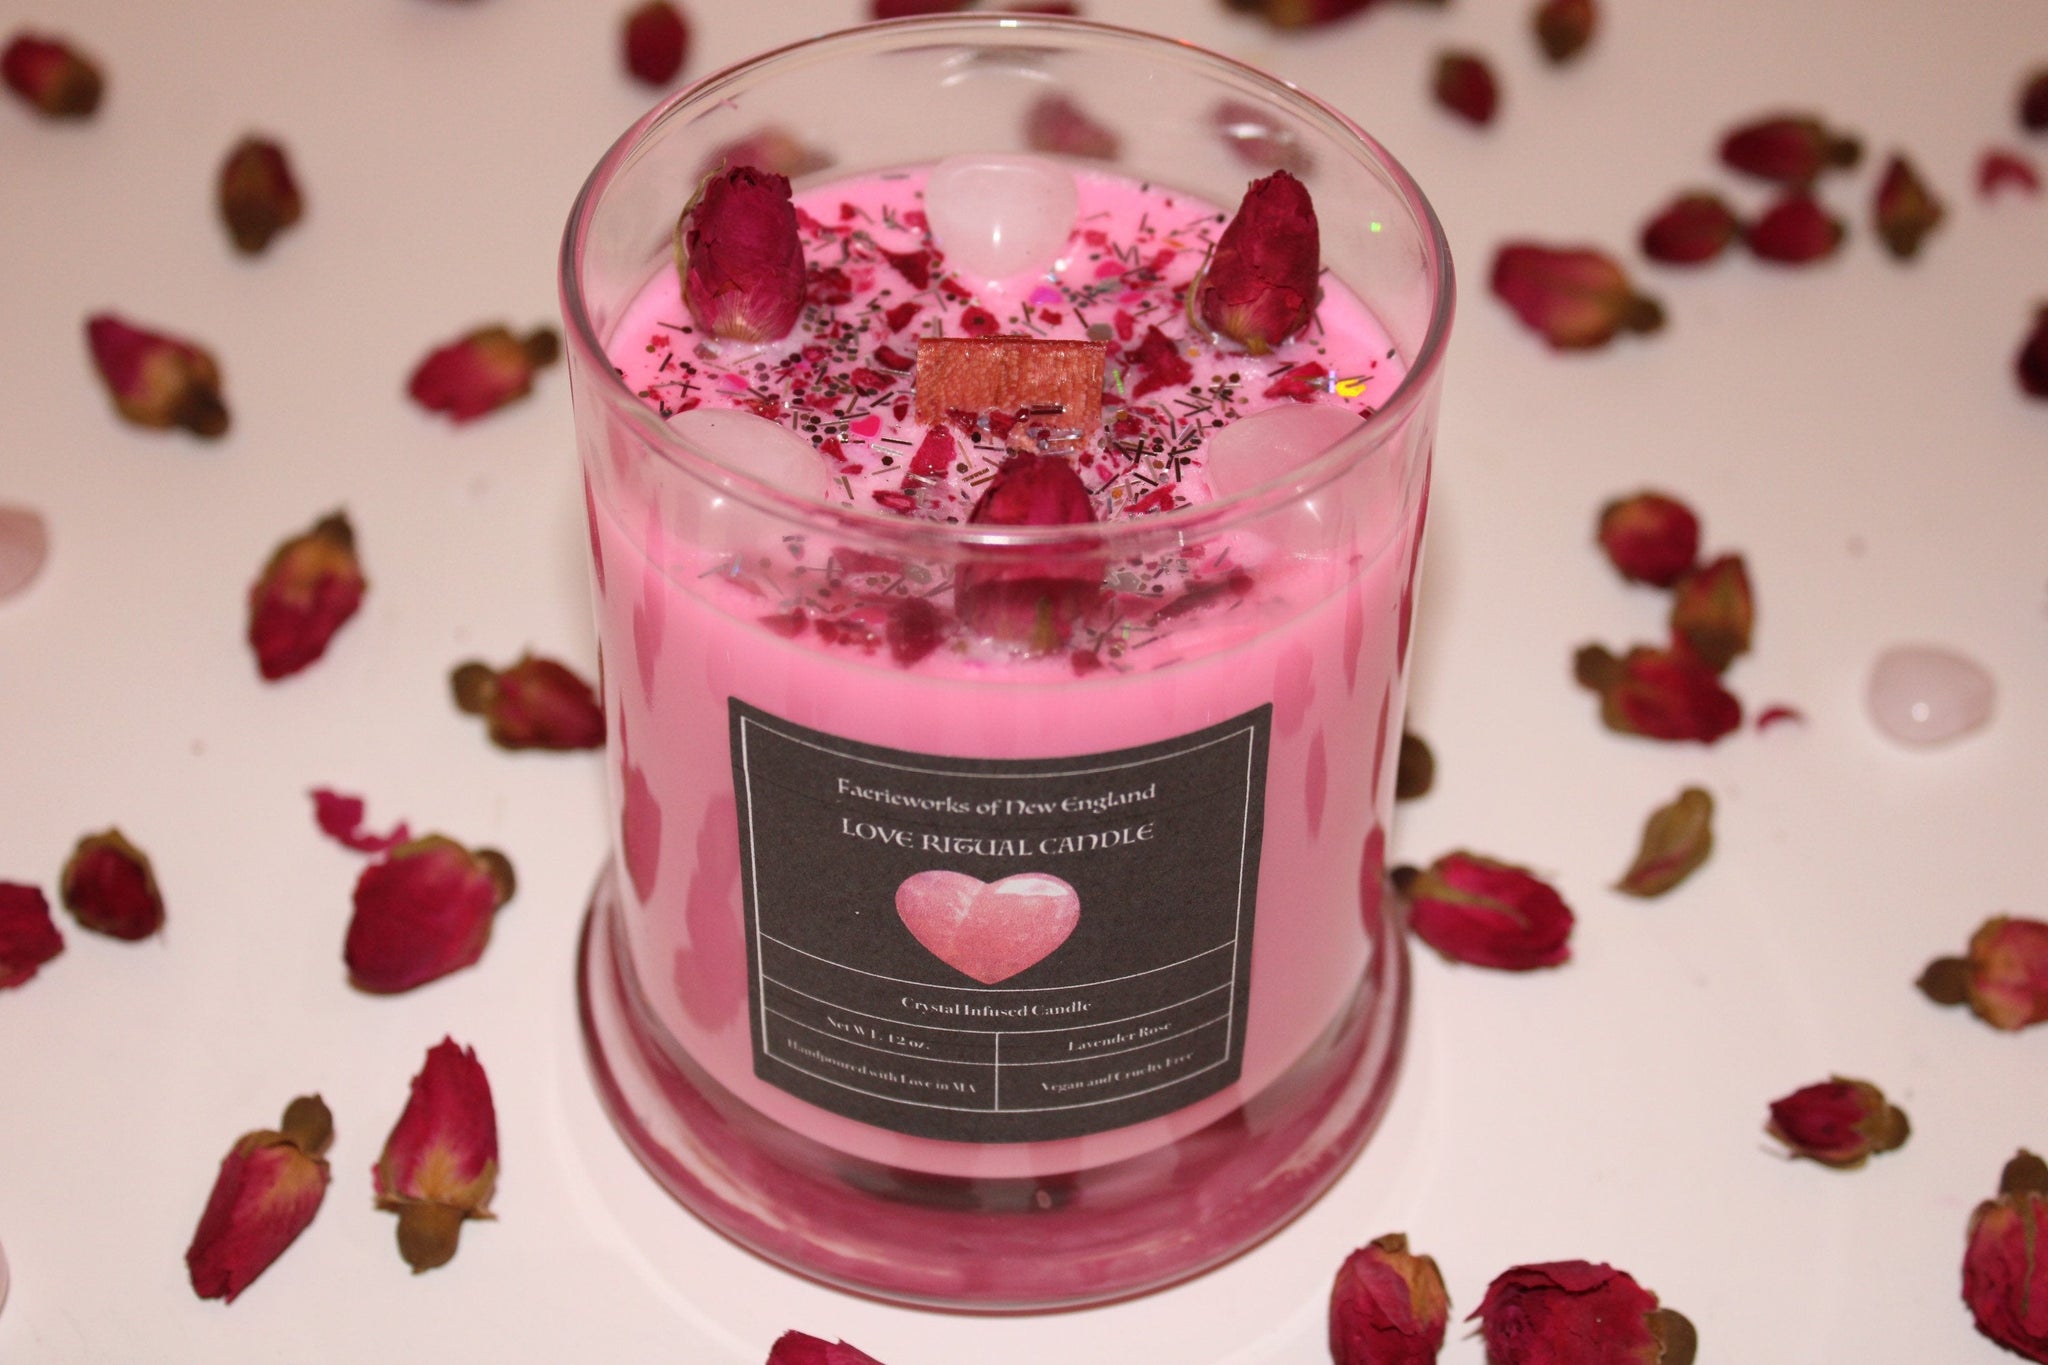 LOVE Crystal Candle|Crystal Candle|Intention Candle|Intention Candles|Love|Crystal Healing|Self Care|Meditation|Flowers|Crystal Candles